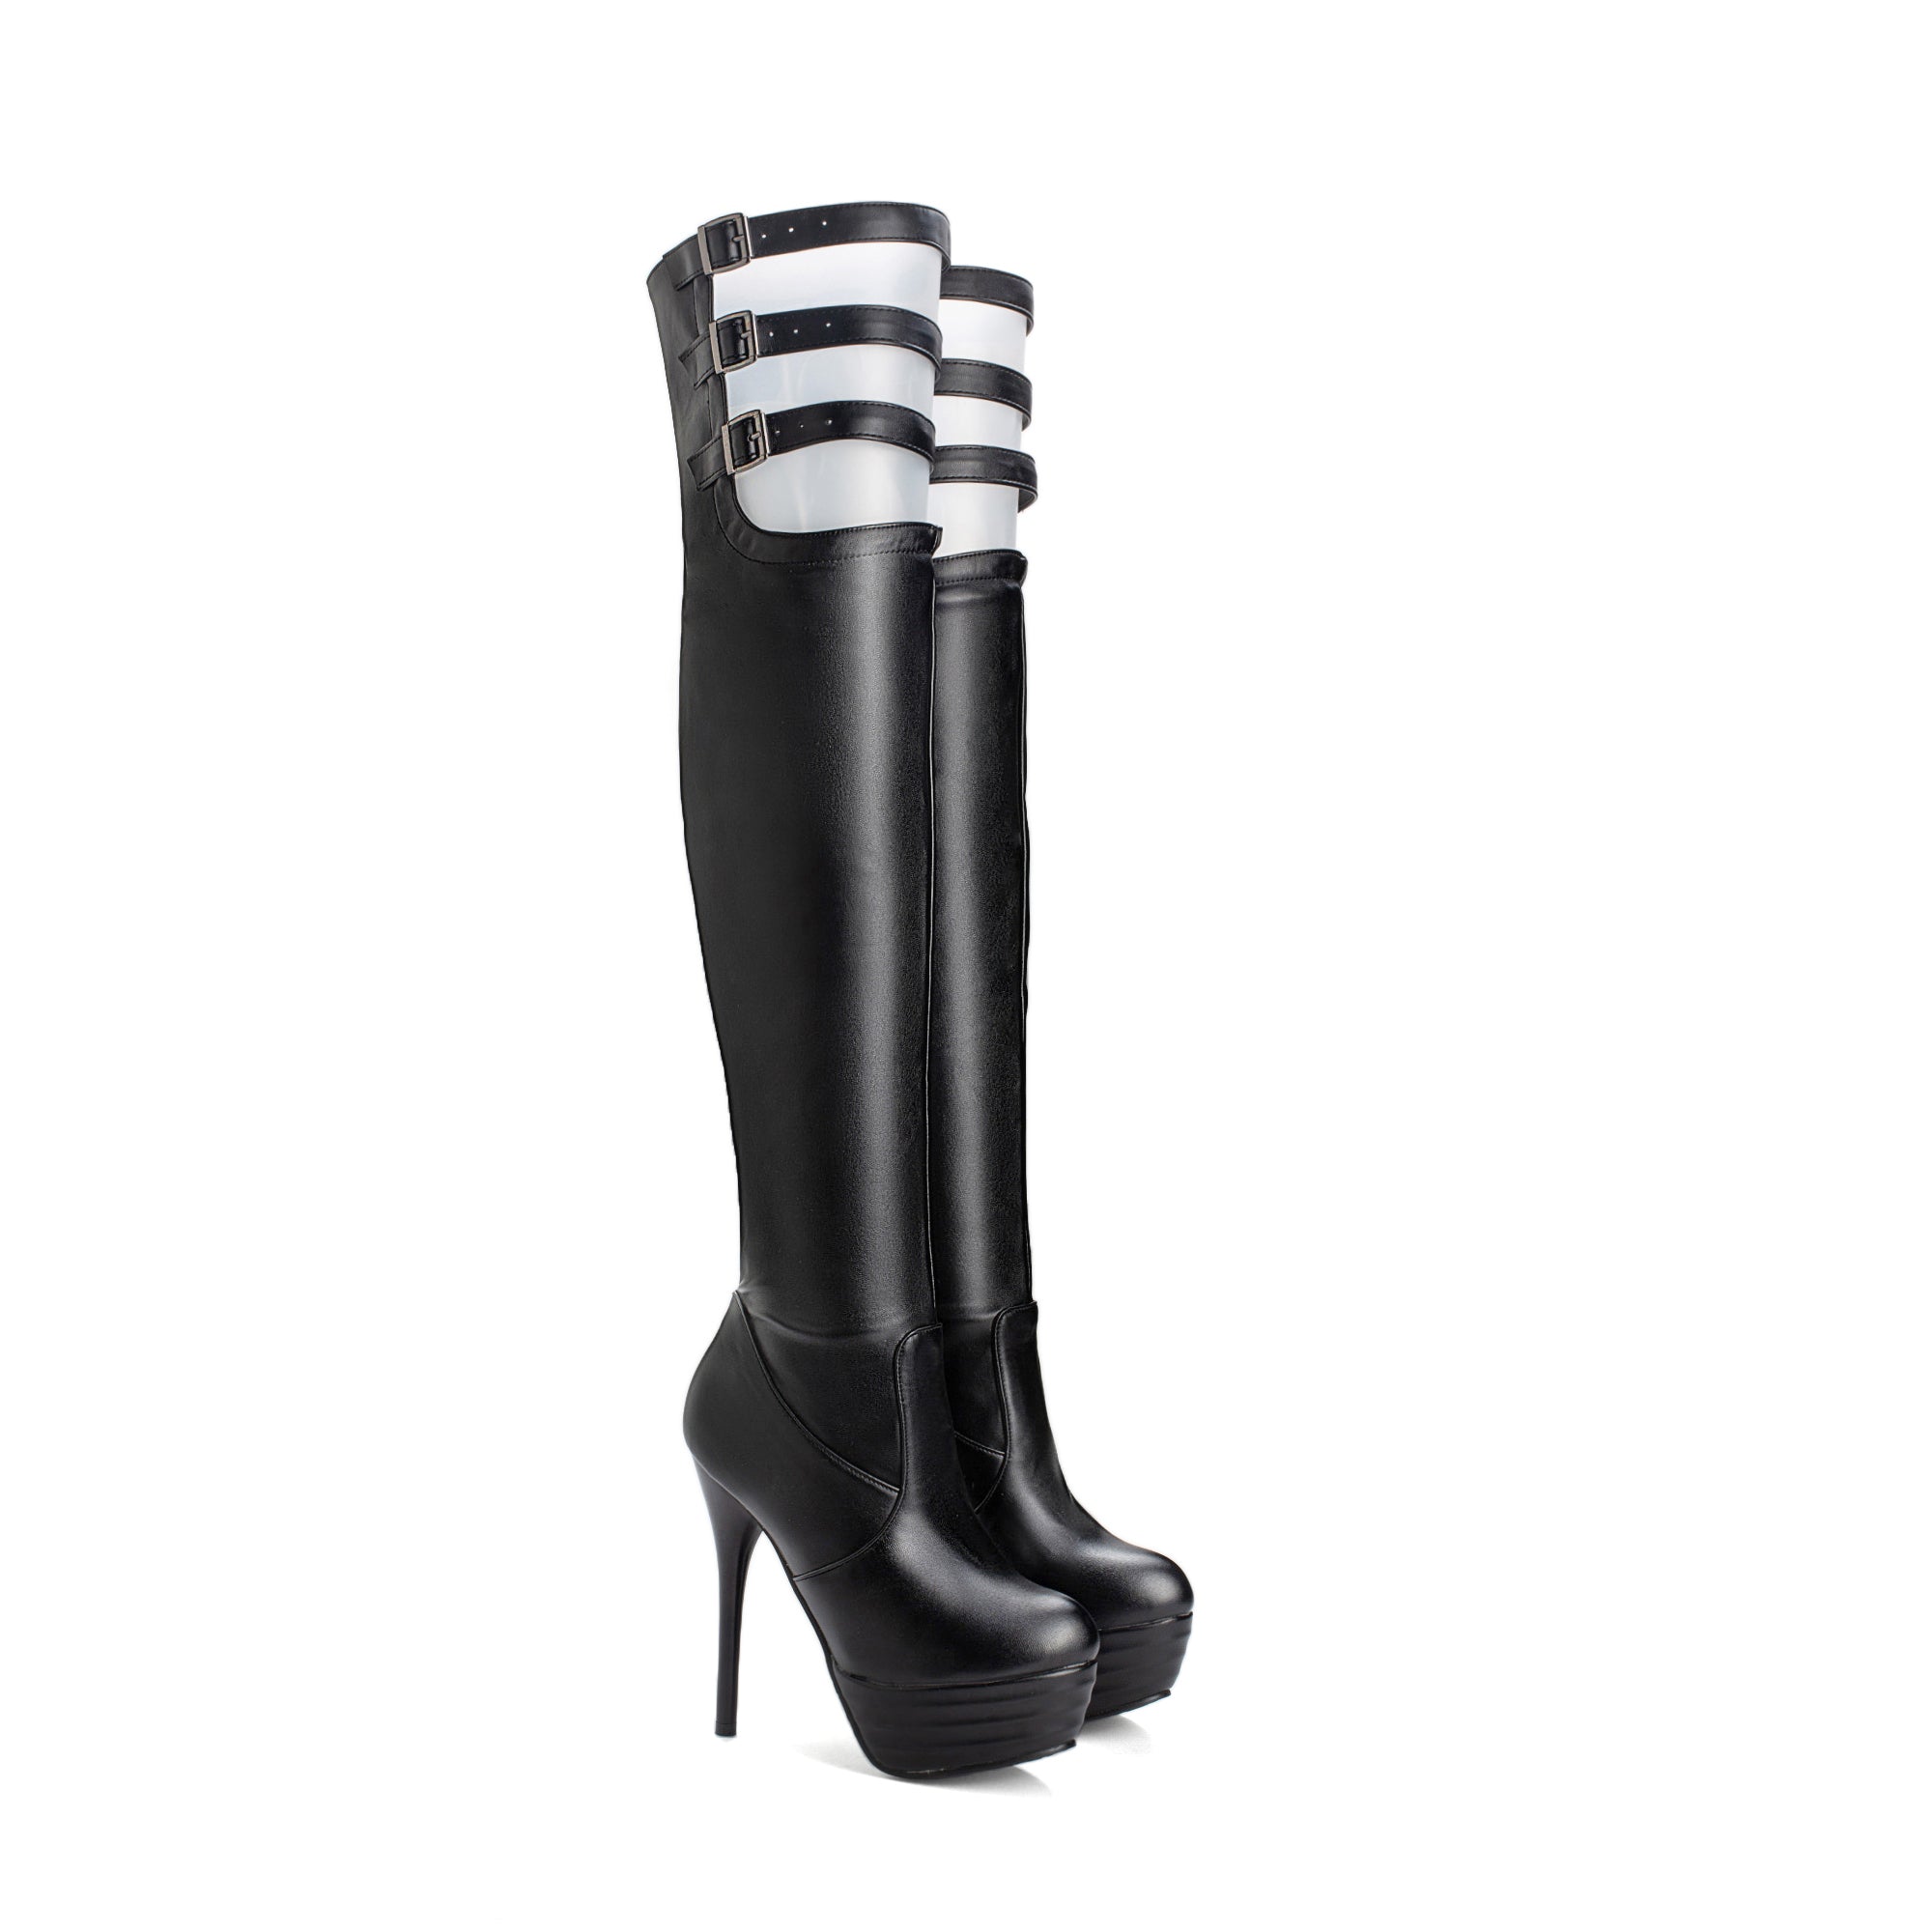 Bigsizeheels High heel over-the-knee boots with round toe waterproof platform - Black freeshipping - bigsizeheel®-size5-size15 -All Plus Sizes Available!